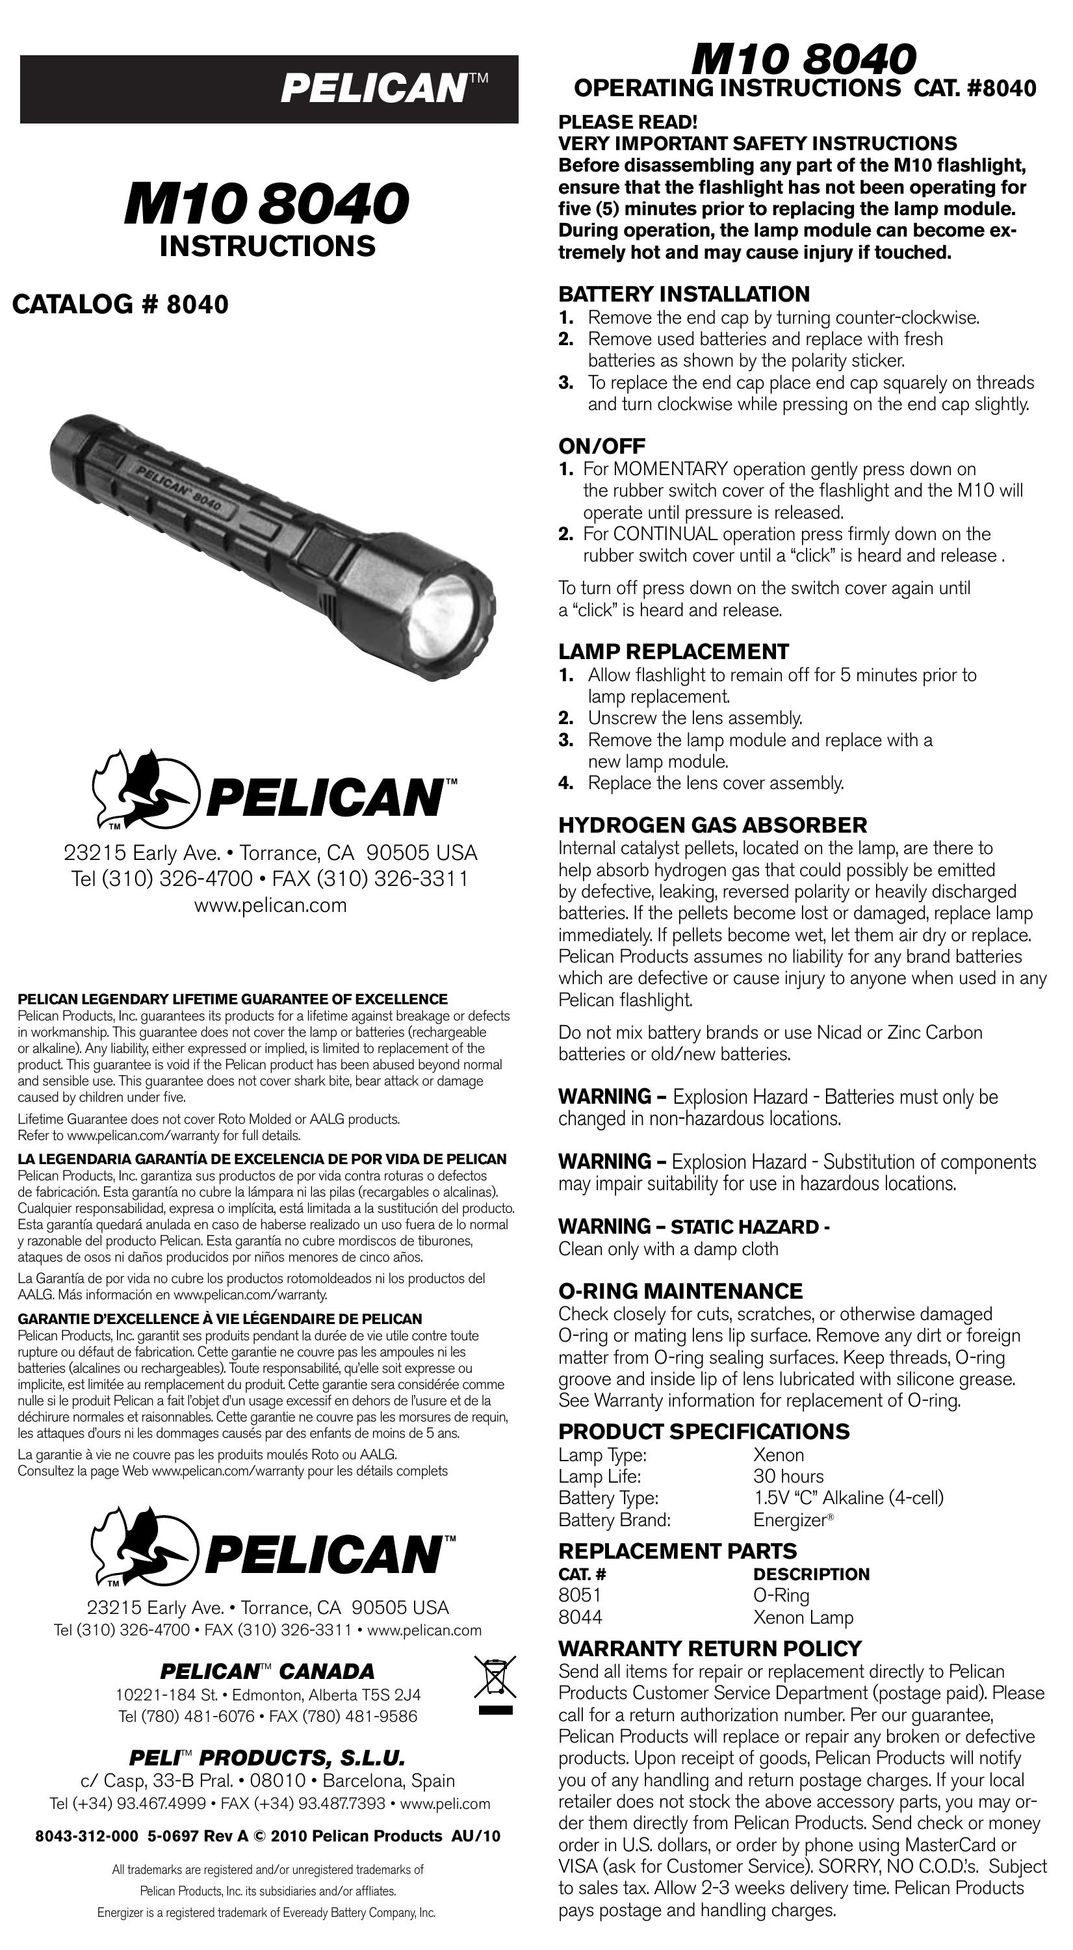 Pelican M10 8040 Home Safety Product User Manual